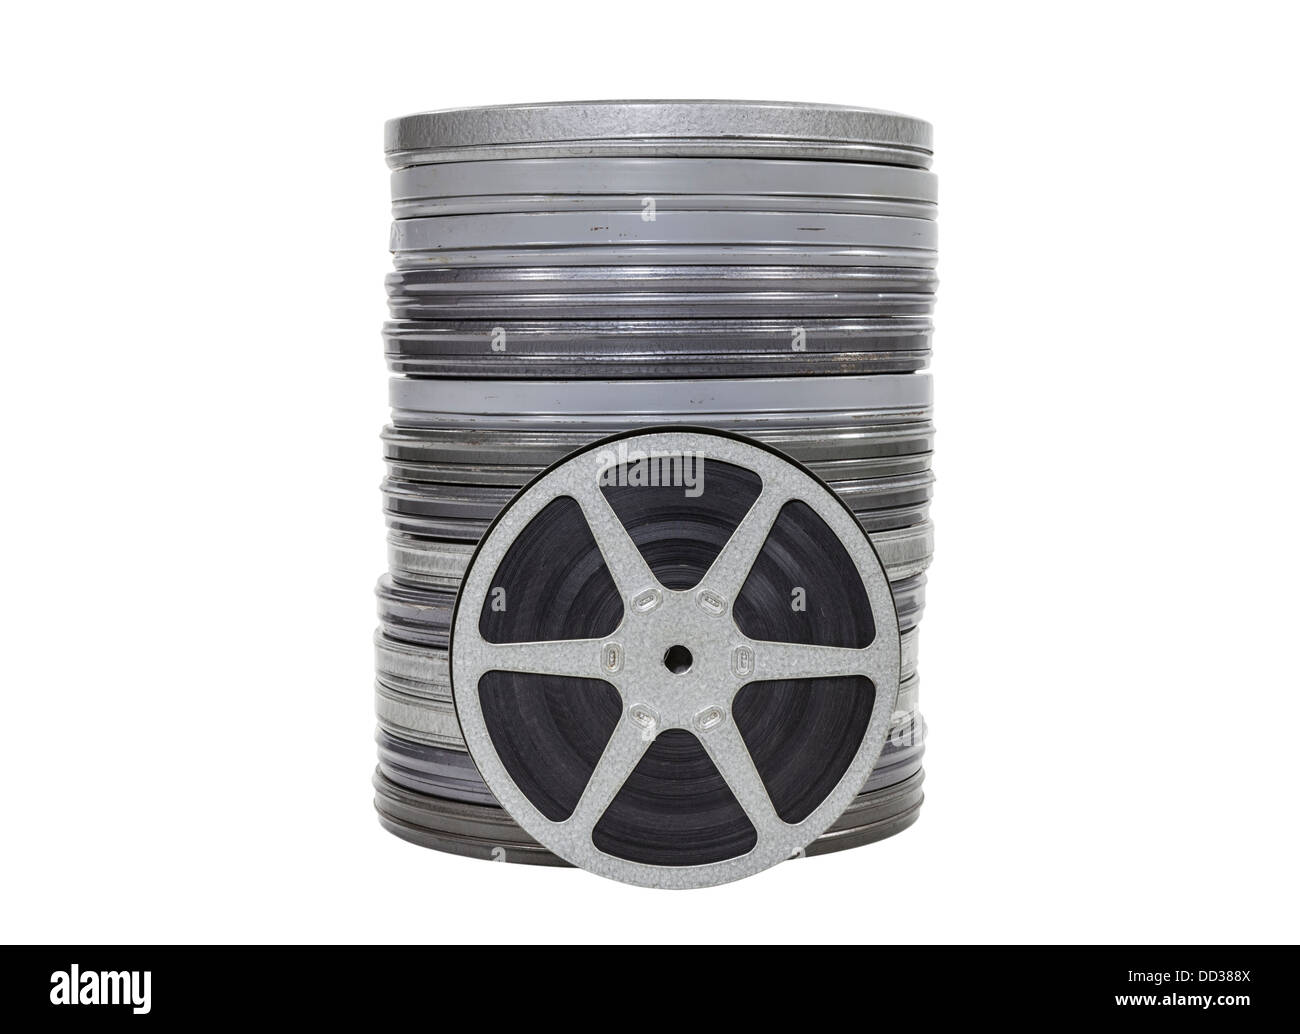 Film cans Cut Out Stock Images & Pictures - Alamy